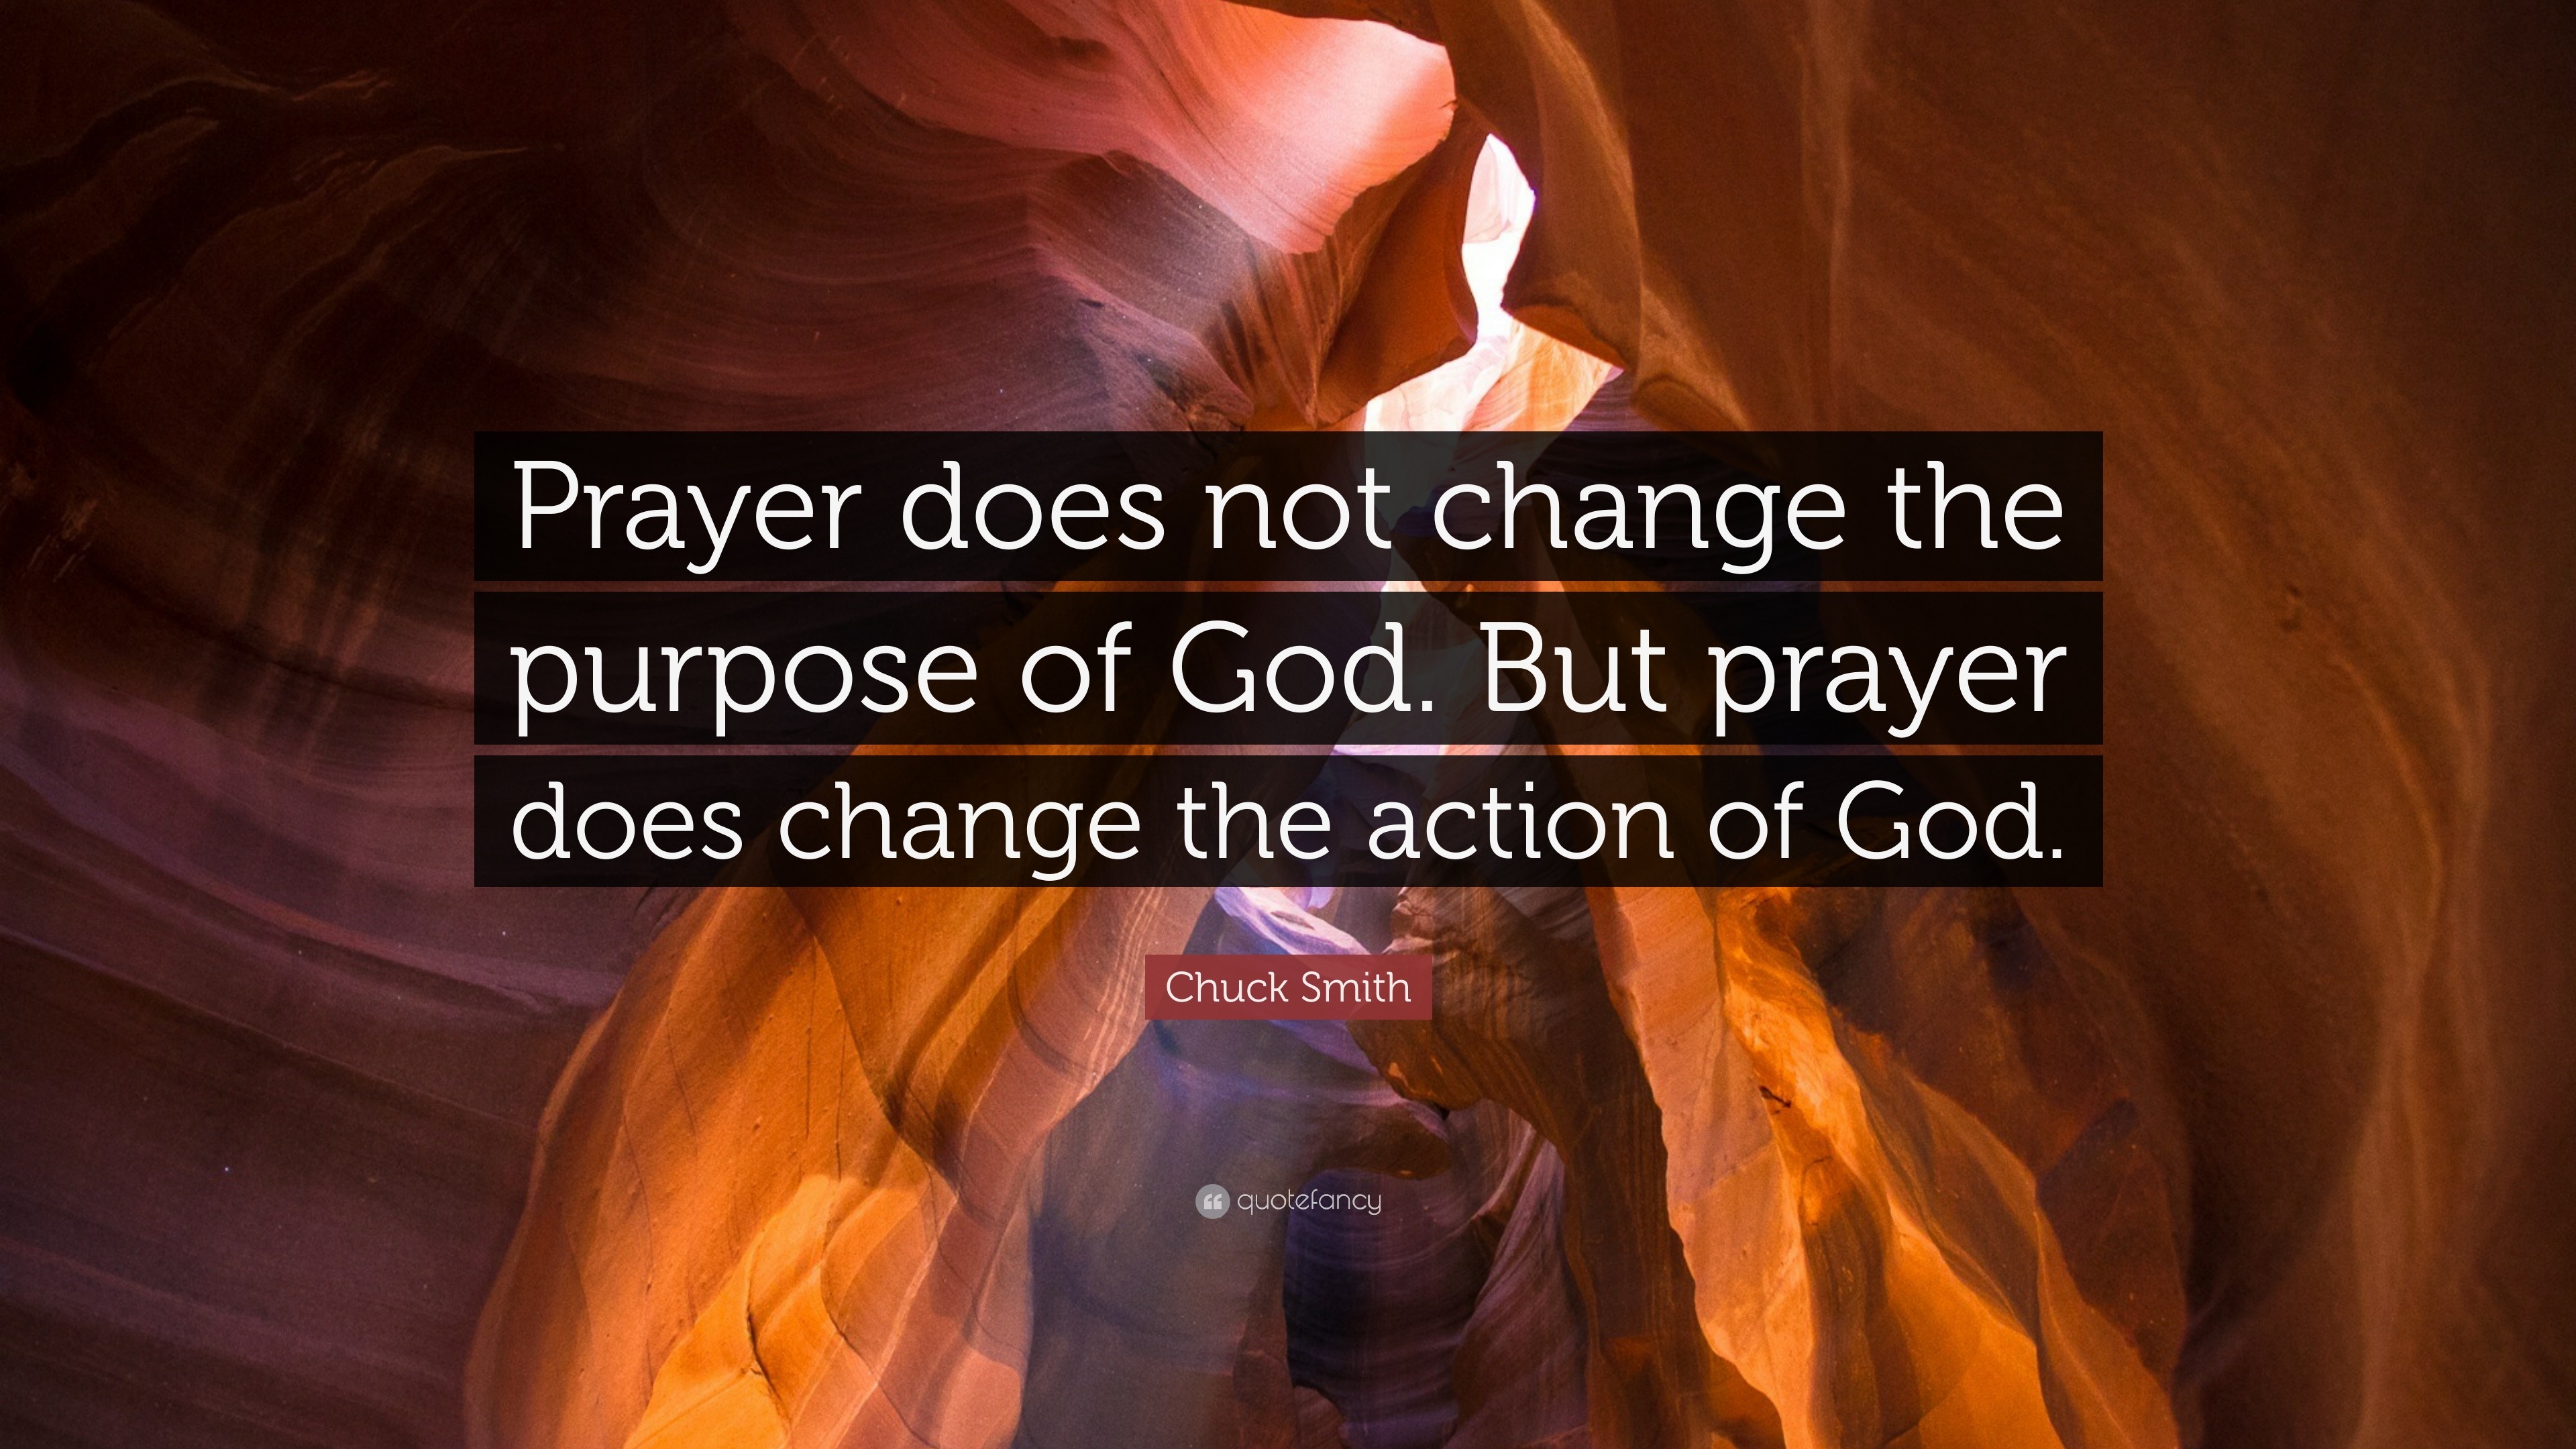 Prayer does not change the purpose of God. 